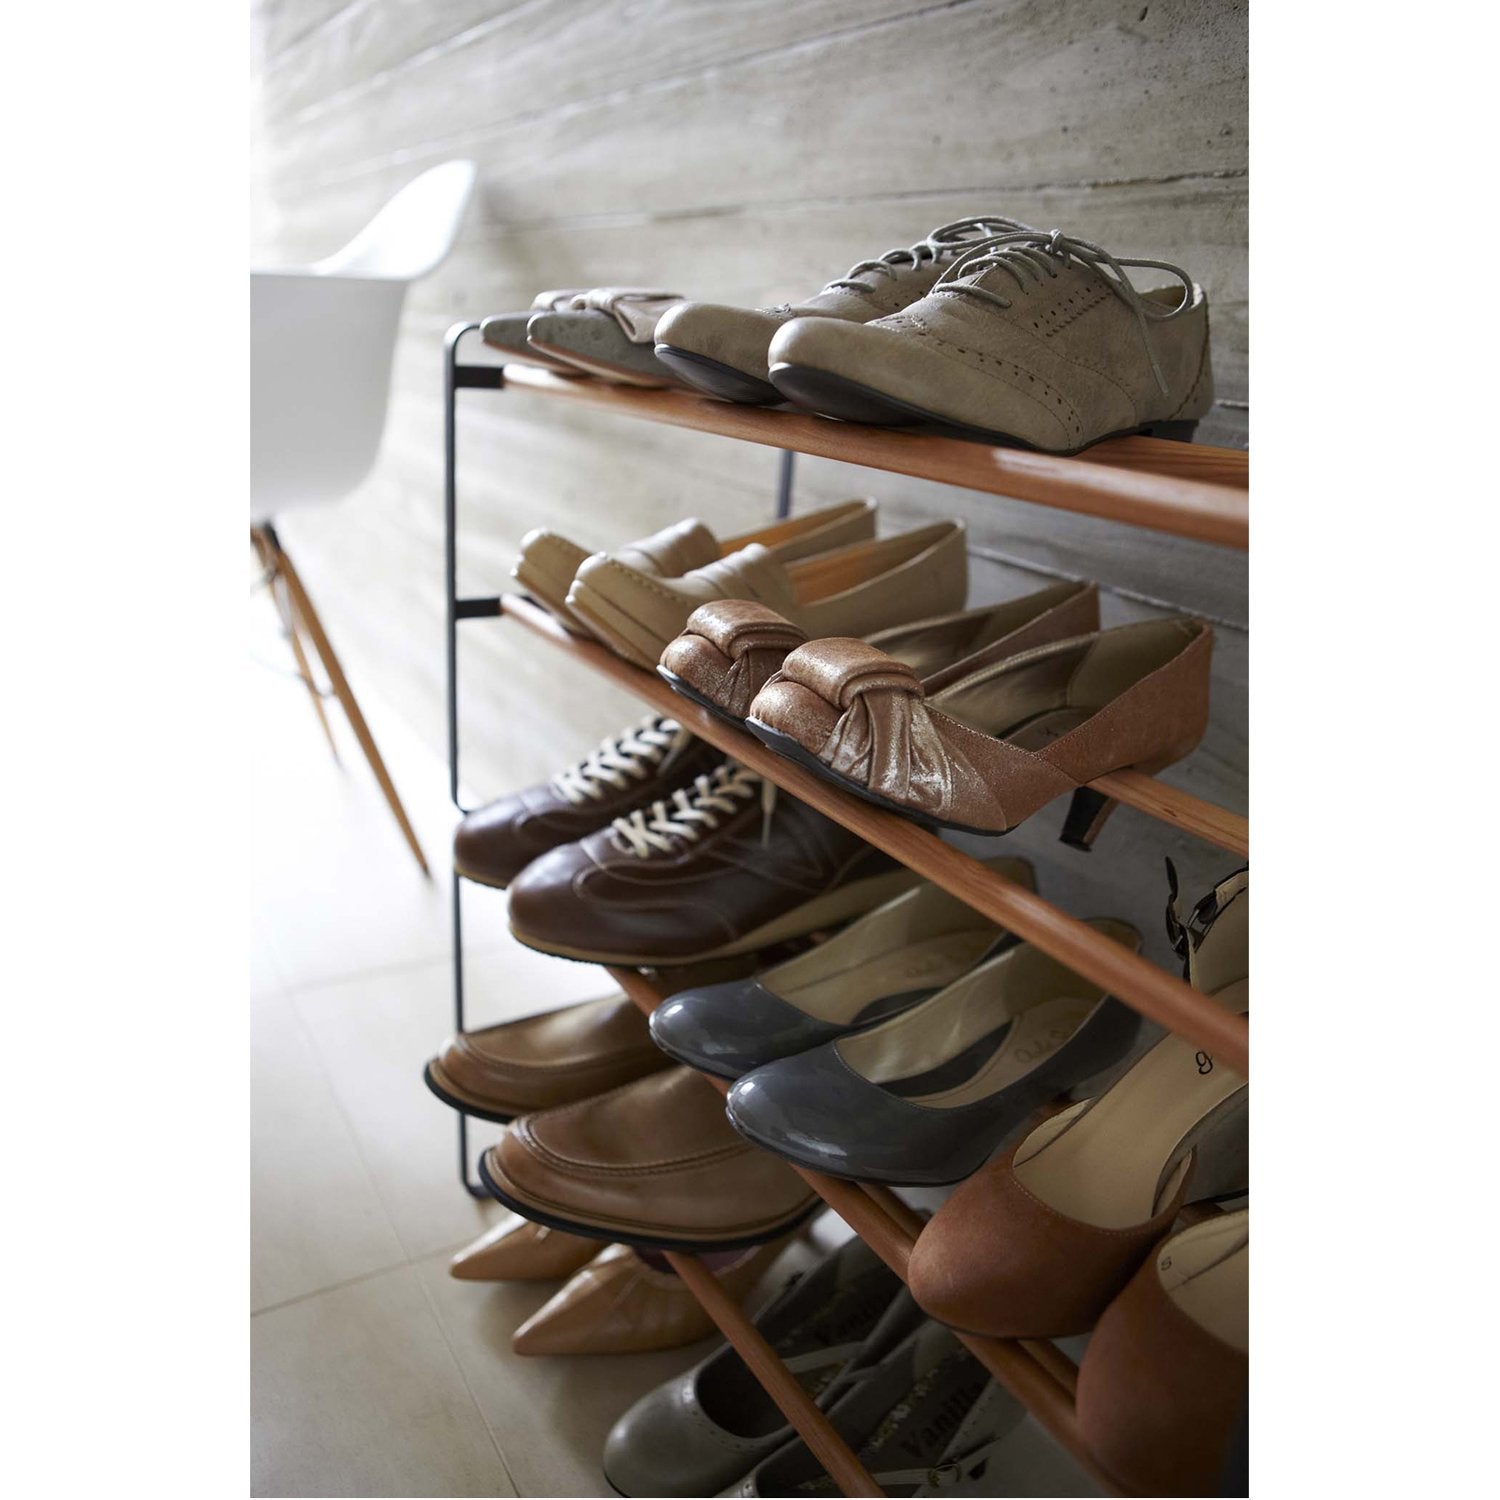 Yamazaki Home Stackable Shoe Rack, White, Steel, Holds up to 4 pairs of  shoes per shelf, Supports 6.6 pounds, Stackable 